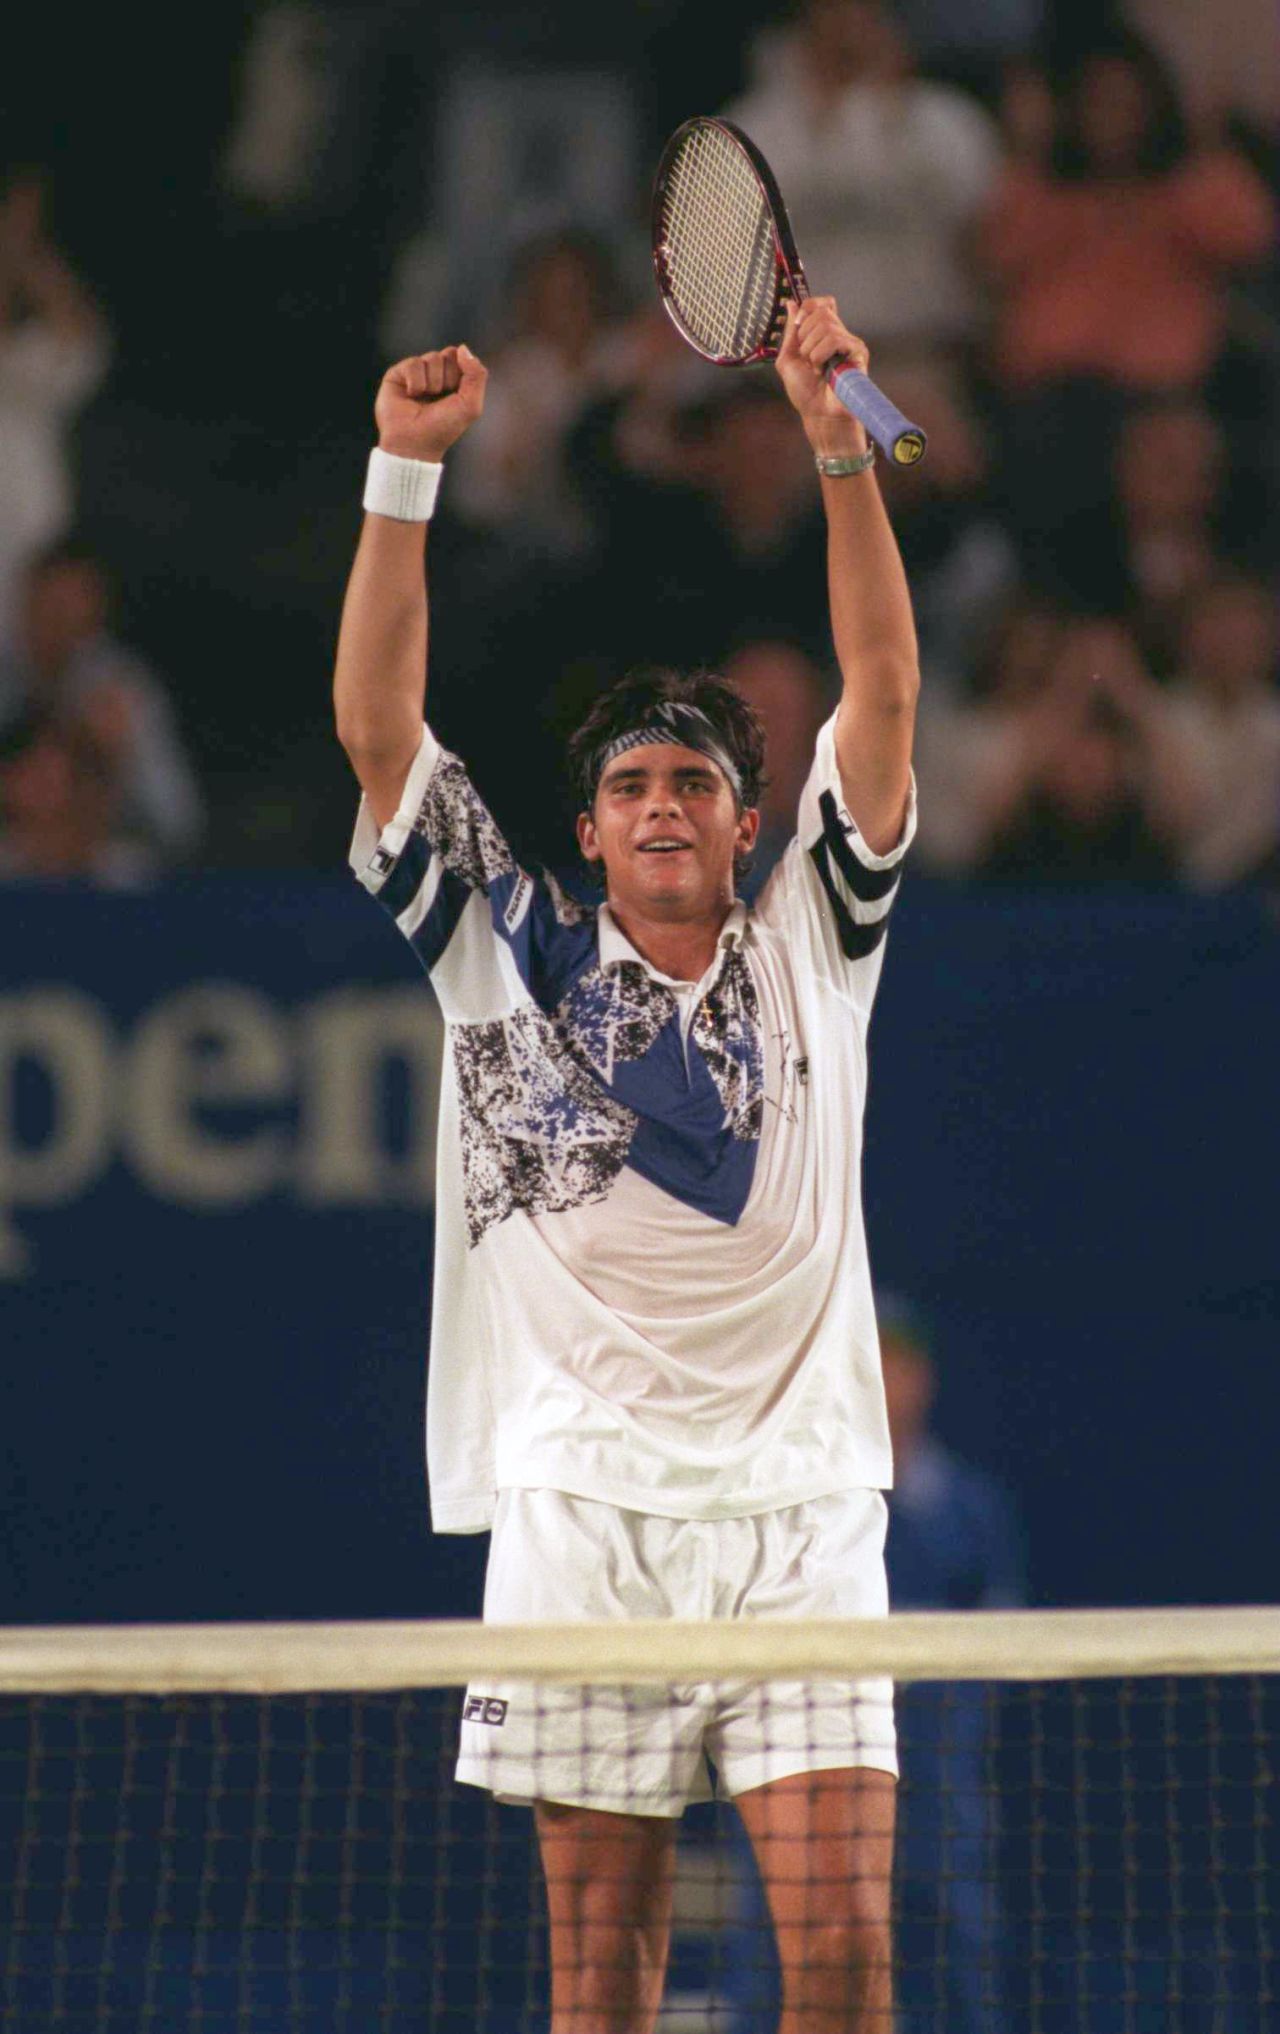 Melbourne-born Philippoussis announced himself on the tennis scene with a third round victory over Pete Sampras at the U.S. Open in 1996.